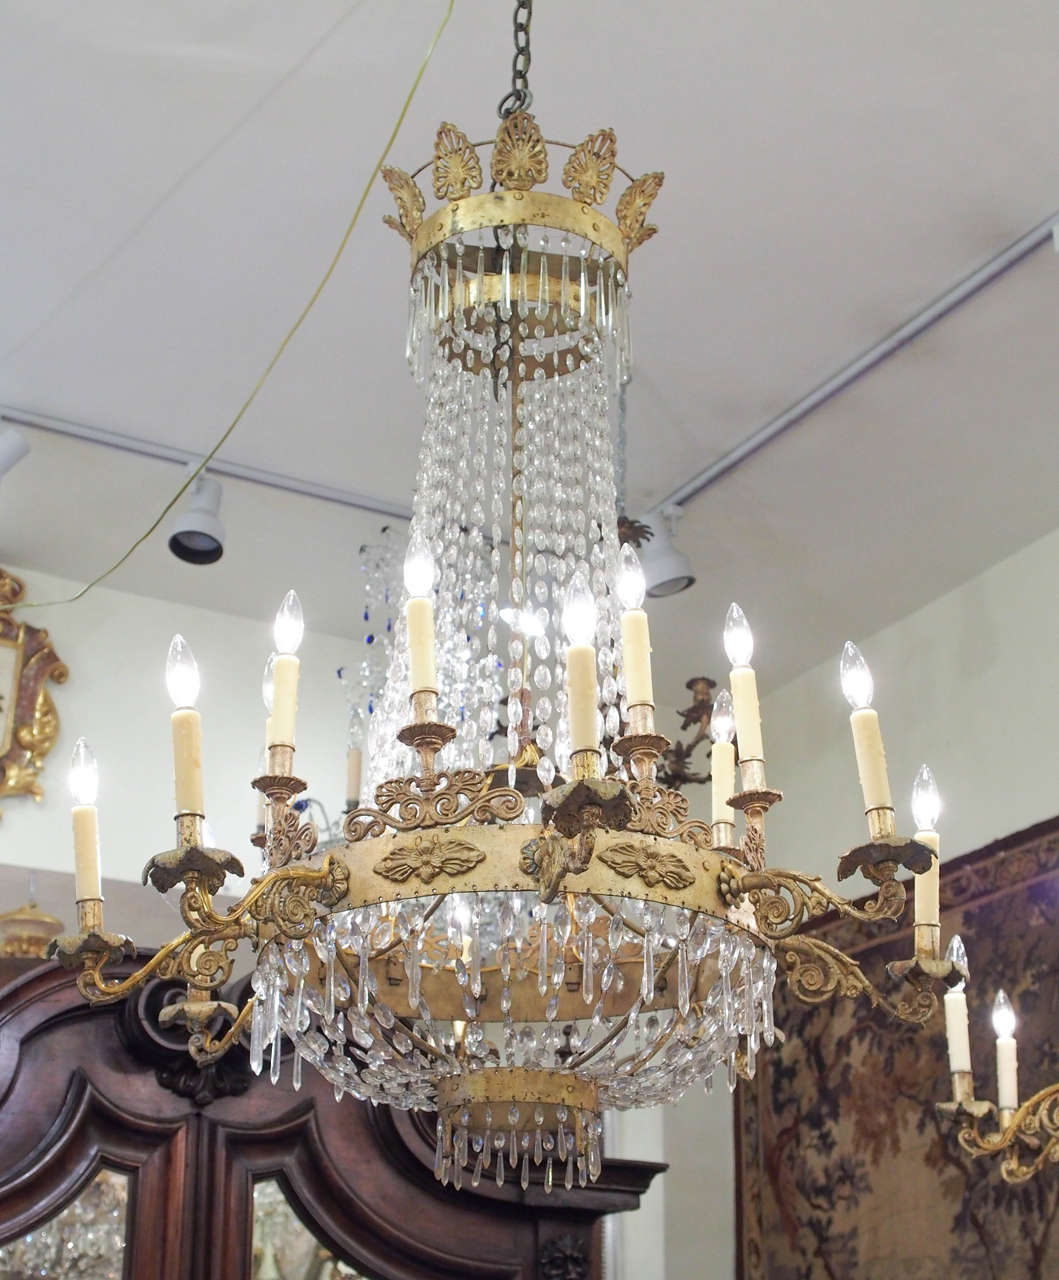 Pair of Italian Empire Gilt Iron and Crystal Chandelier, 19th century Palermo. Gilt Iron Stem with a palmette Corona and two tiers of Eight lights for a total of 16 lights.